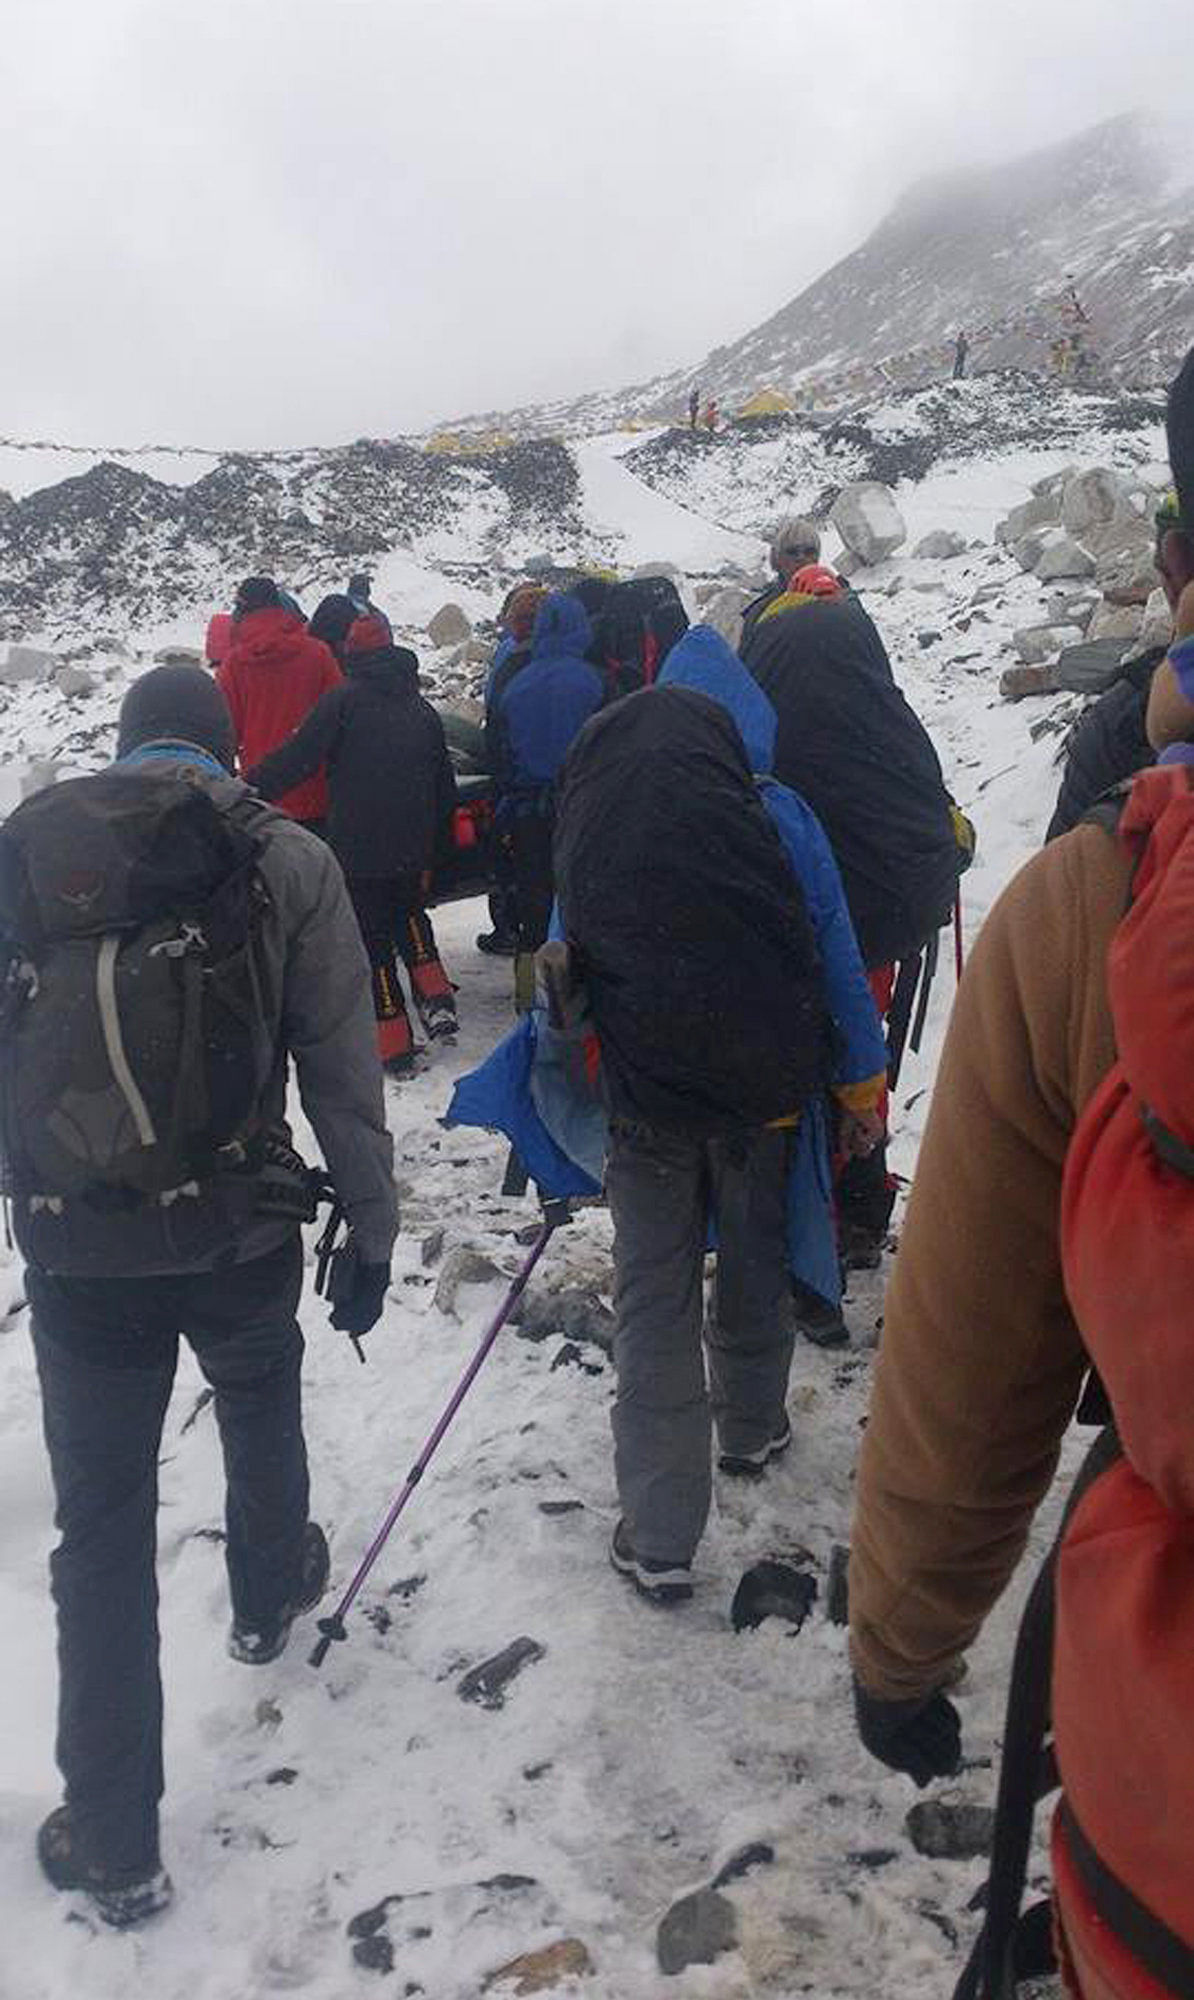 22 bodies have been recovered at the base camp on Mount Everest after quakes triggered an avalanche there.